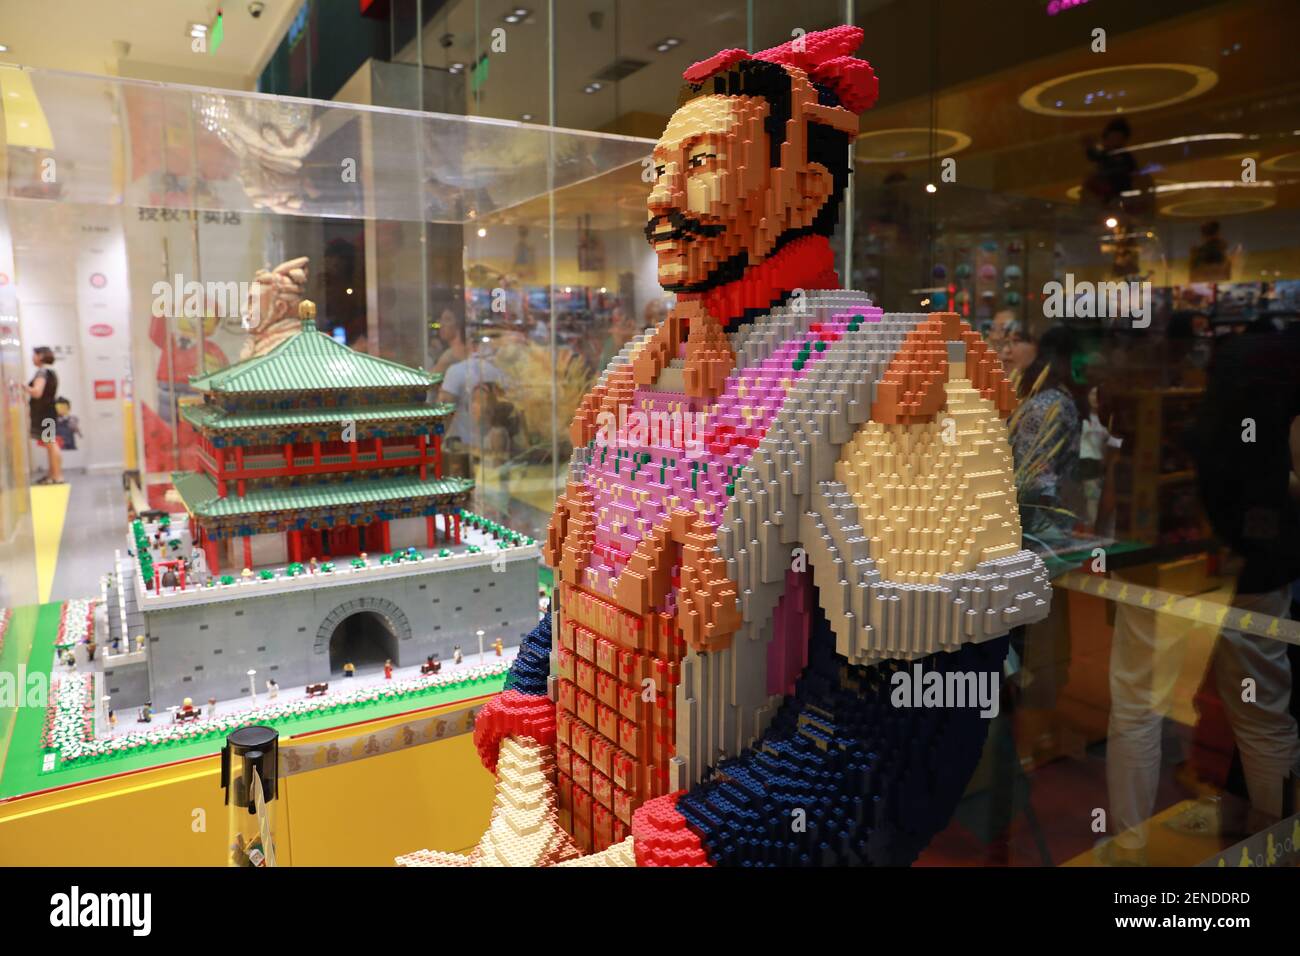 Shaanxi,CHINA-The first lego store in northwest China just opened outside  Xi 'an south gate on July 31, 2019.Exquisite lego restoration of the  ancient city of Xi 'an's clock tower landmarks and building